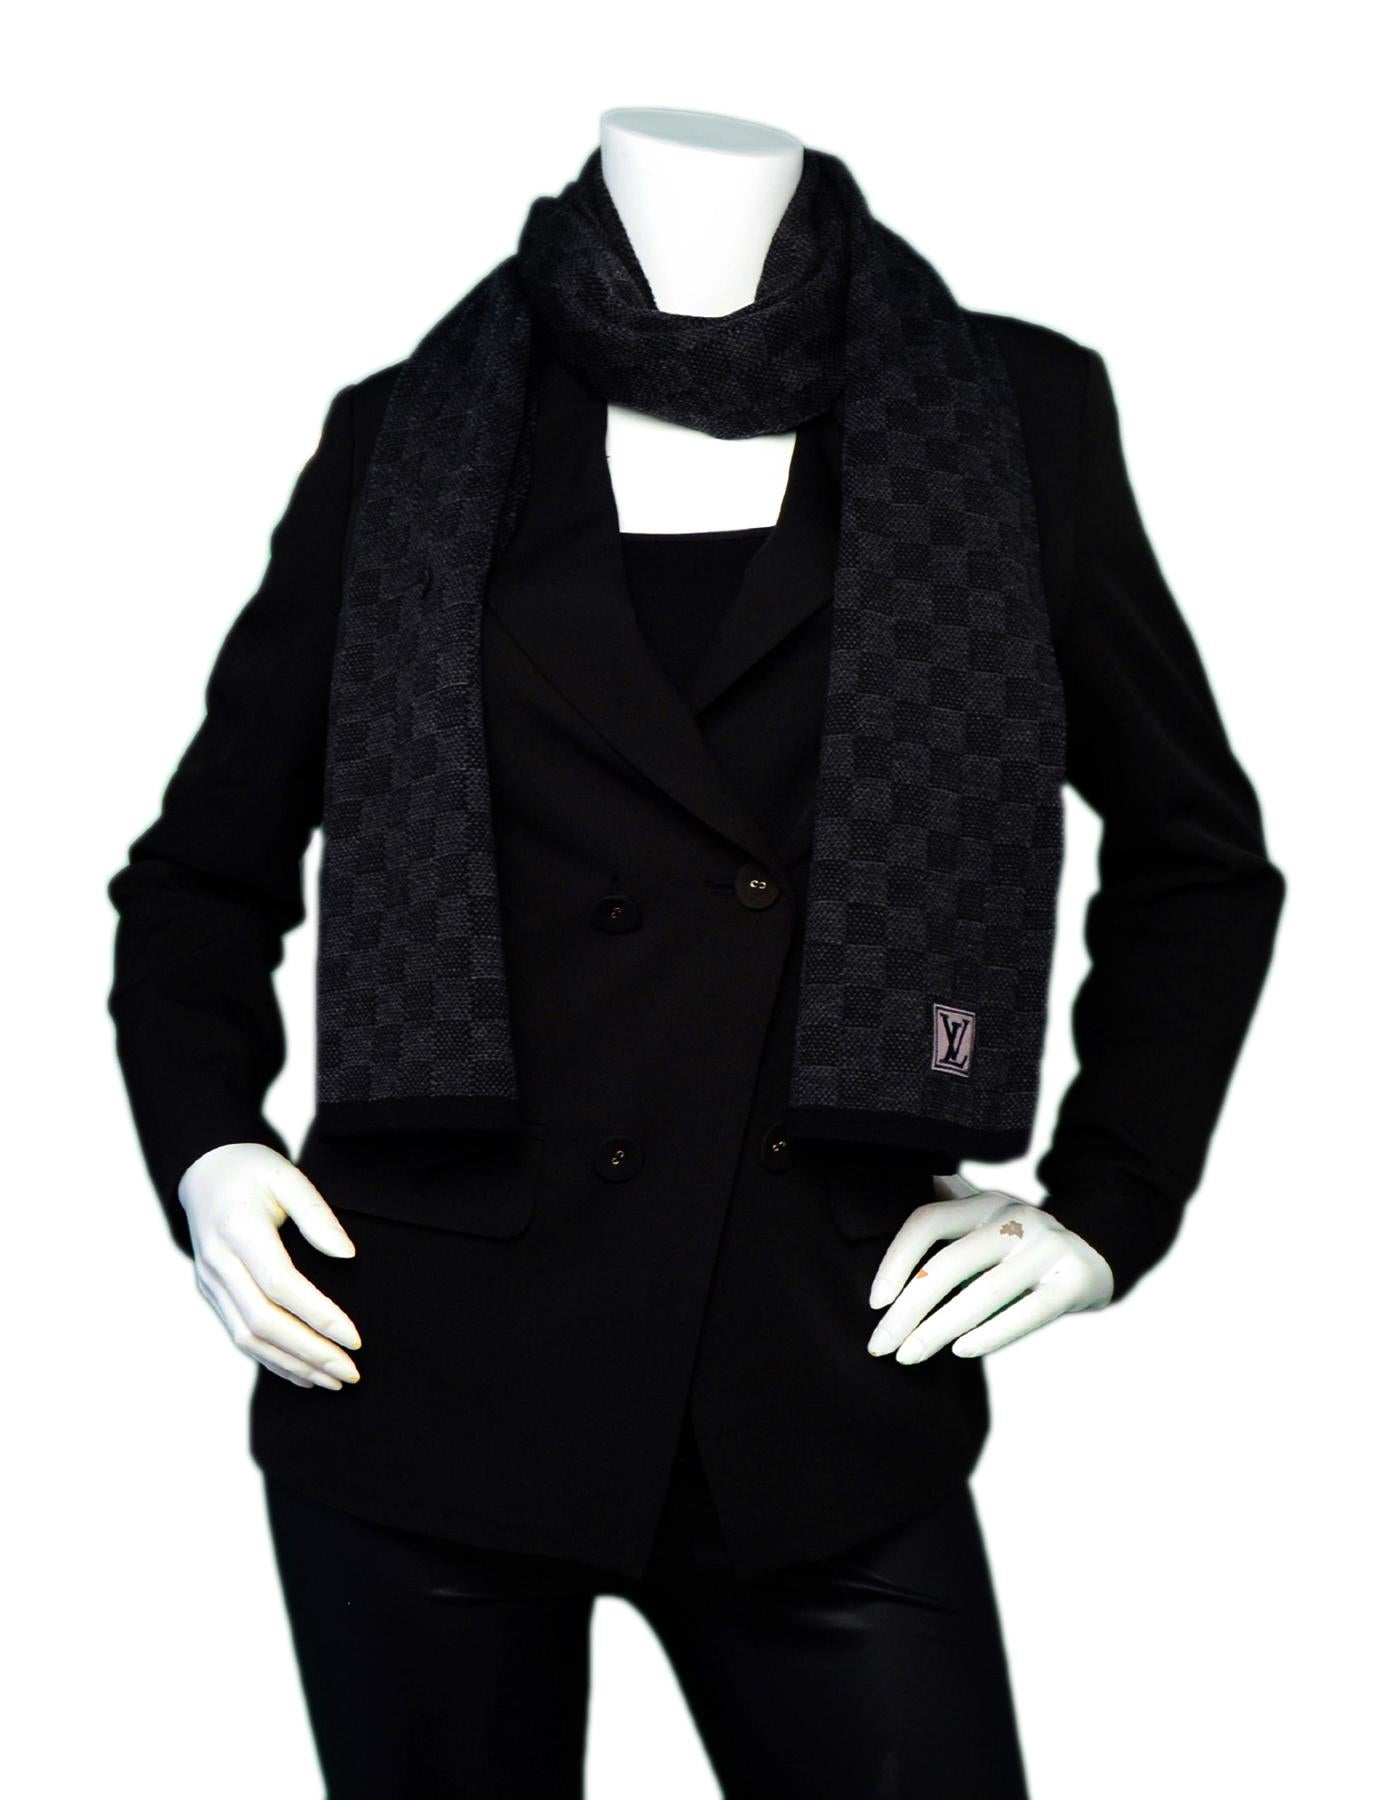 Louis Vuitton Black/Grey Wool Petit Damier Scarf

Made In: Italy
Color: Black, grey
Materials: 100% wool
Overall Condition: Excellent pre-owned condition
Estimated Retail: $410 + tax
Includes: Box
Measurements: 
73